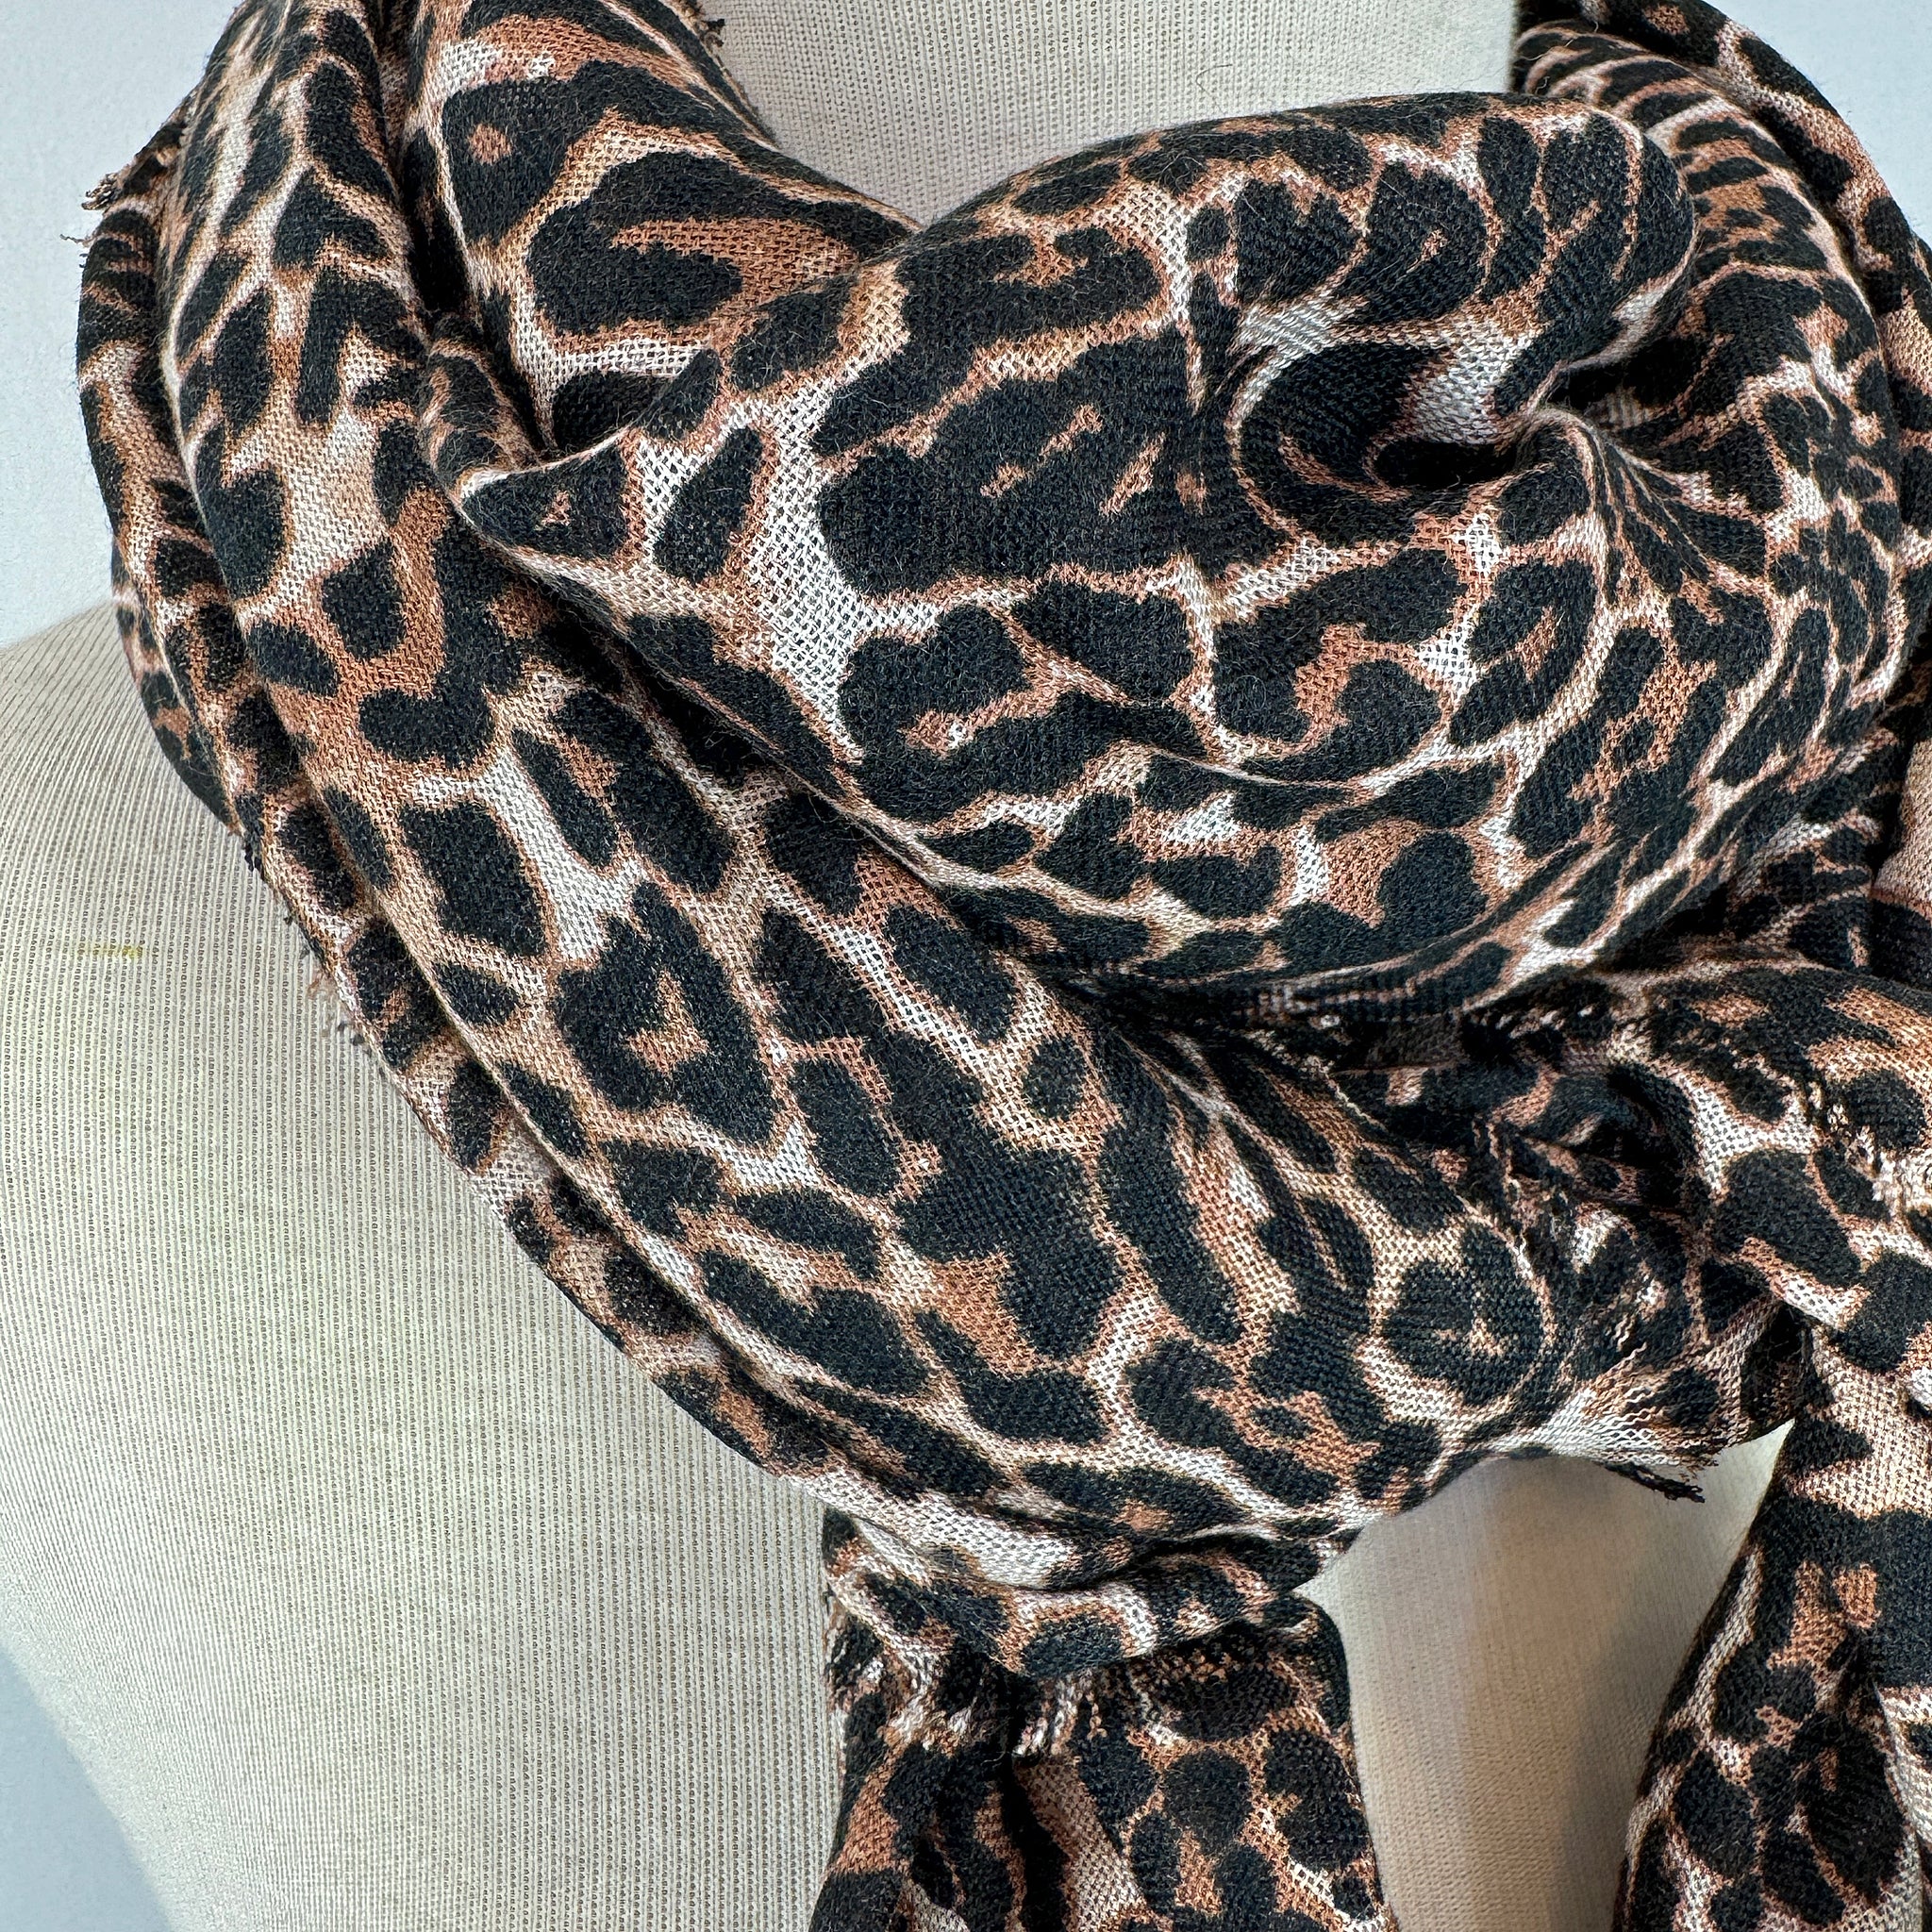 Blue Pacific Leopard Animal Print Micromodal Cashmere Scarf in Chocolate and Tan